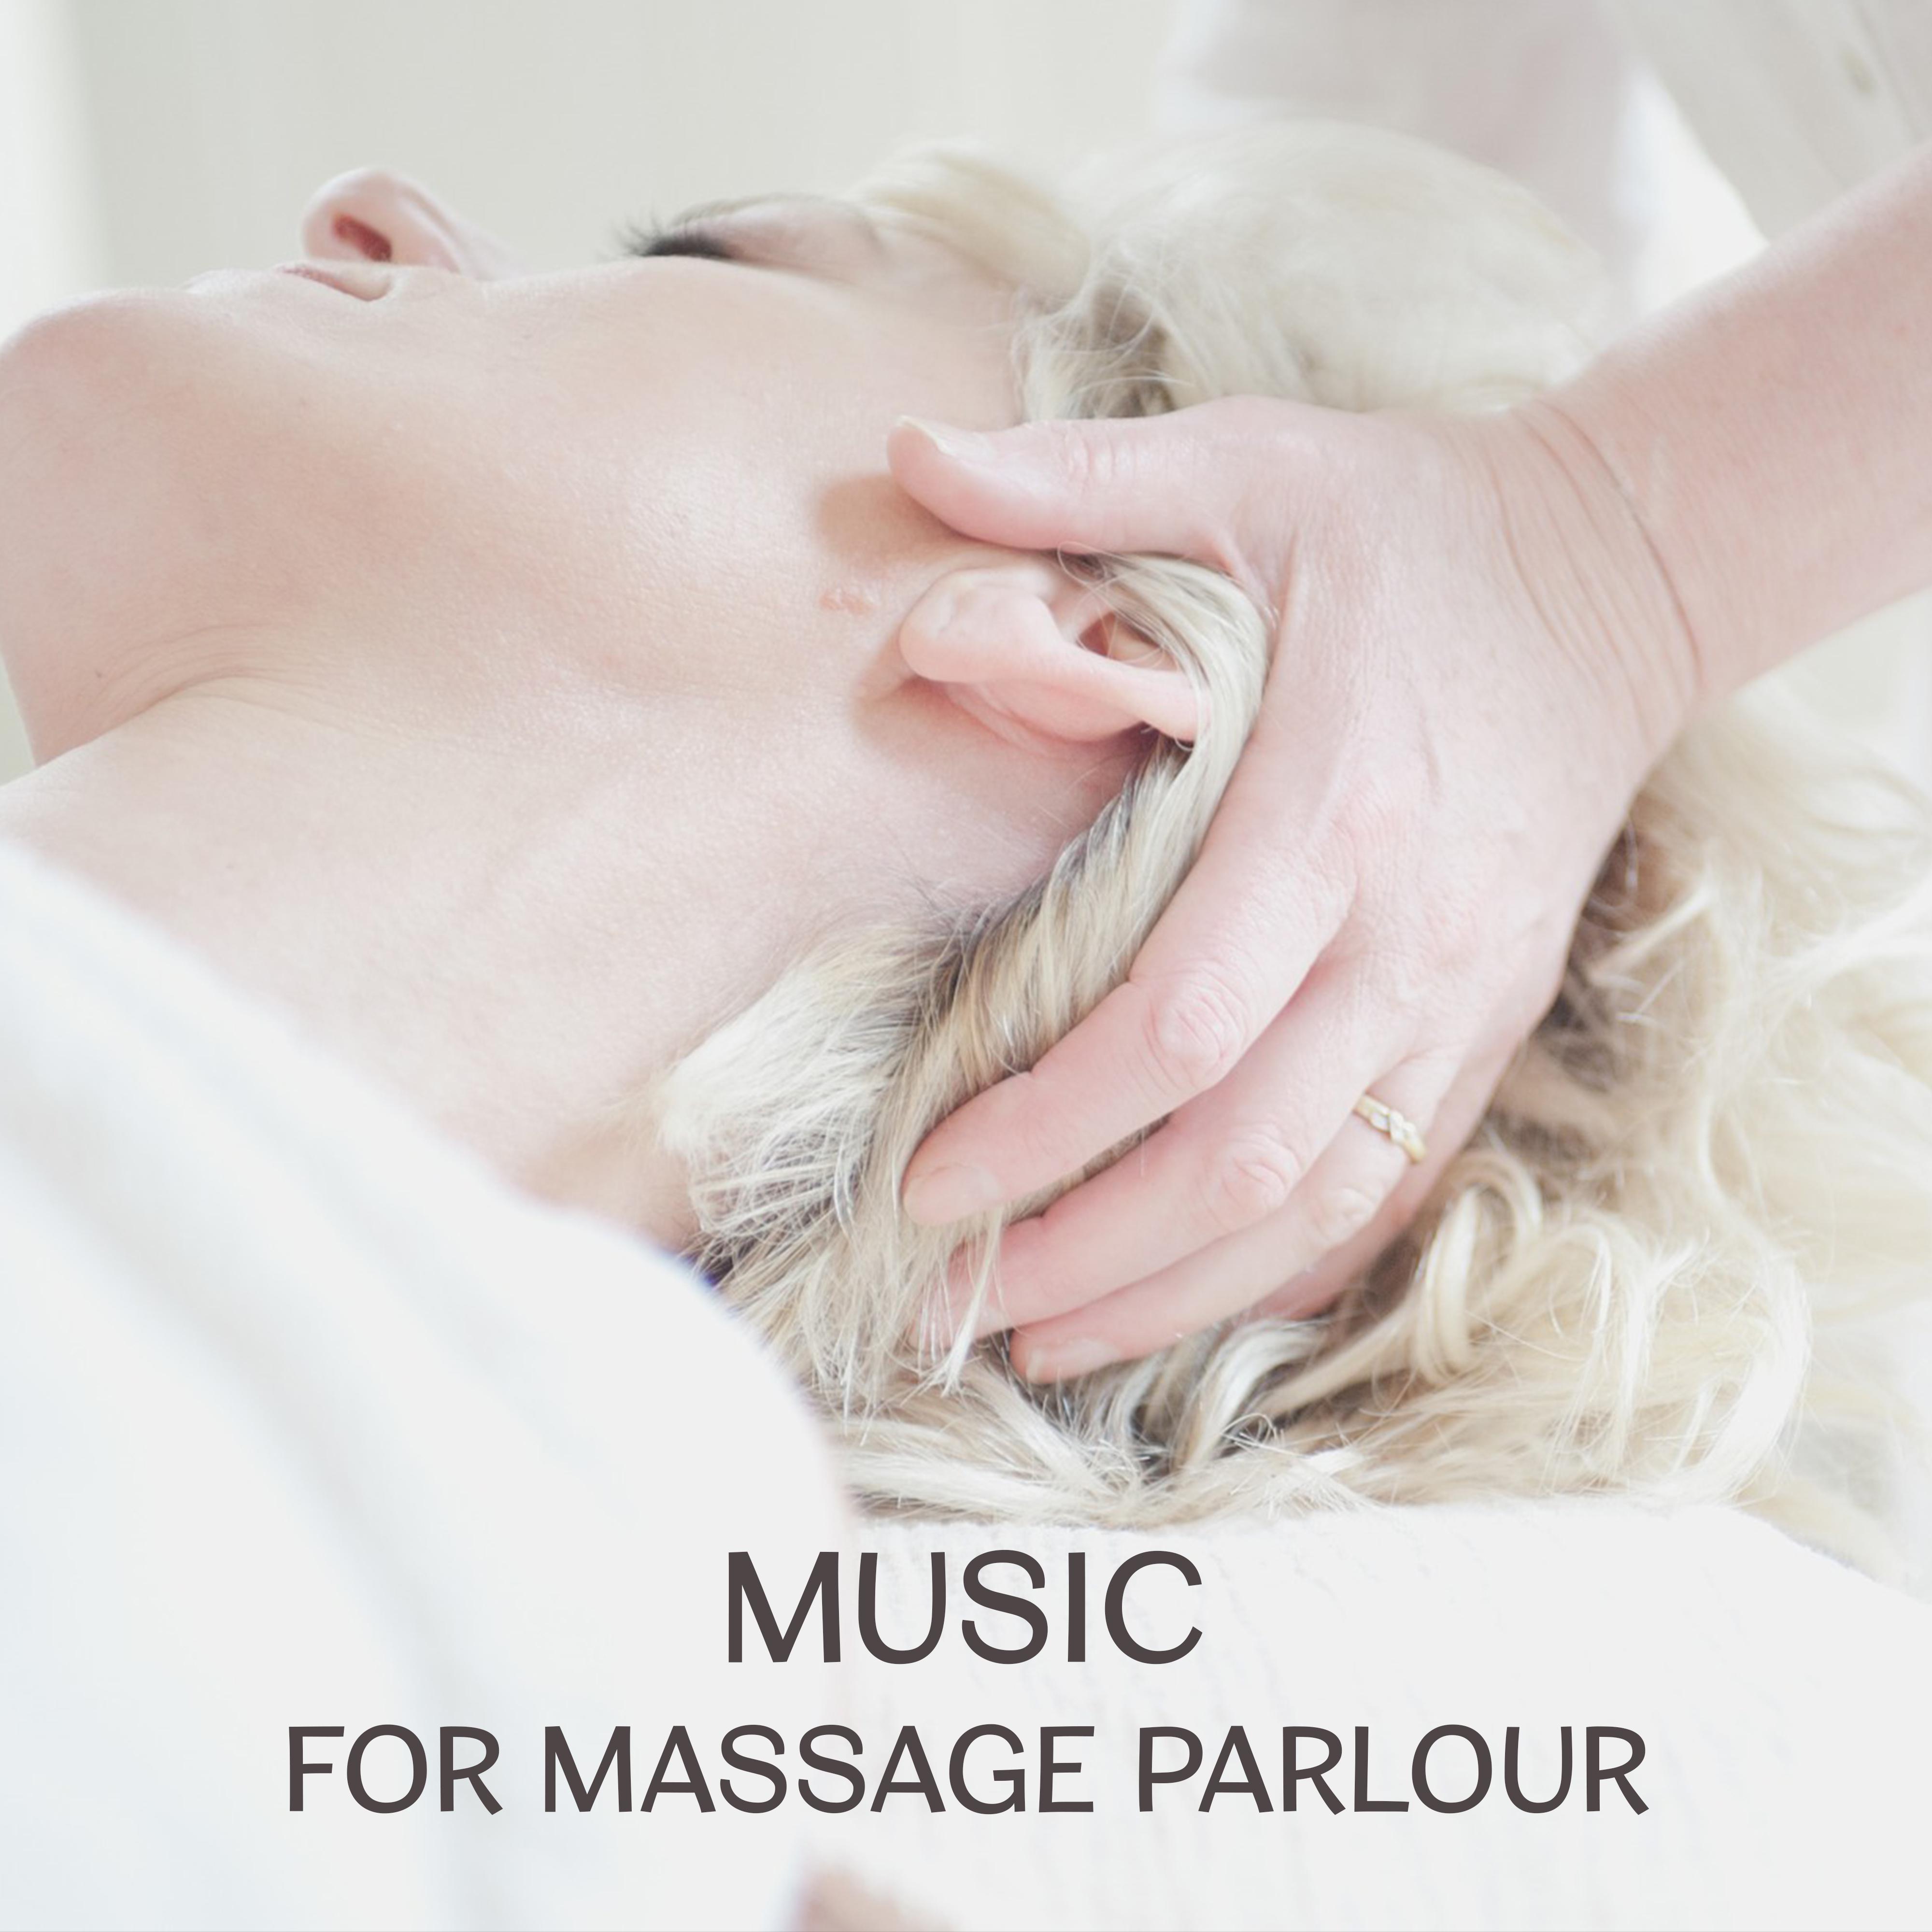 Music for Massage Parlour  Serenity Spa Music, Music for Massage, Relaxing Music Therapy, Deep Relaxation, Finest Selected New Age Songs